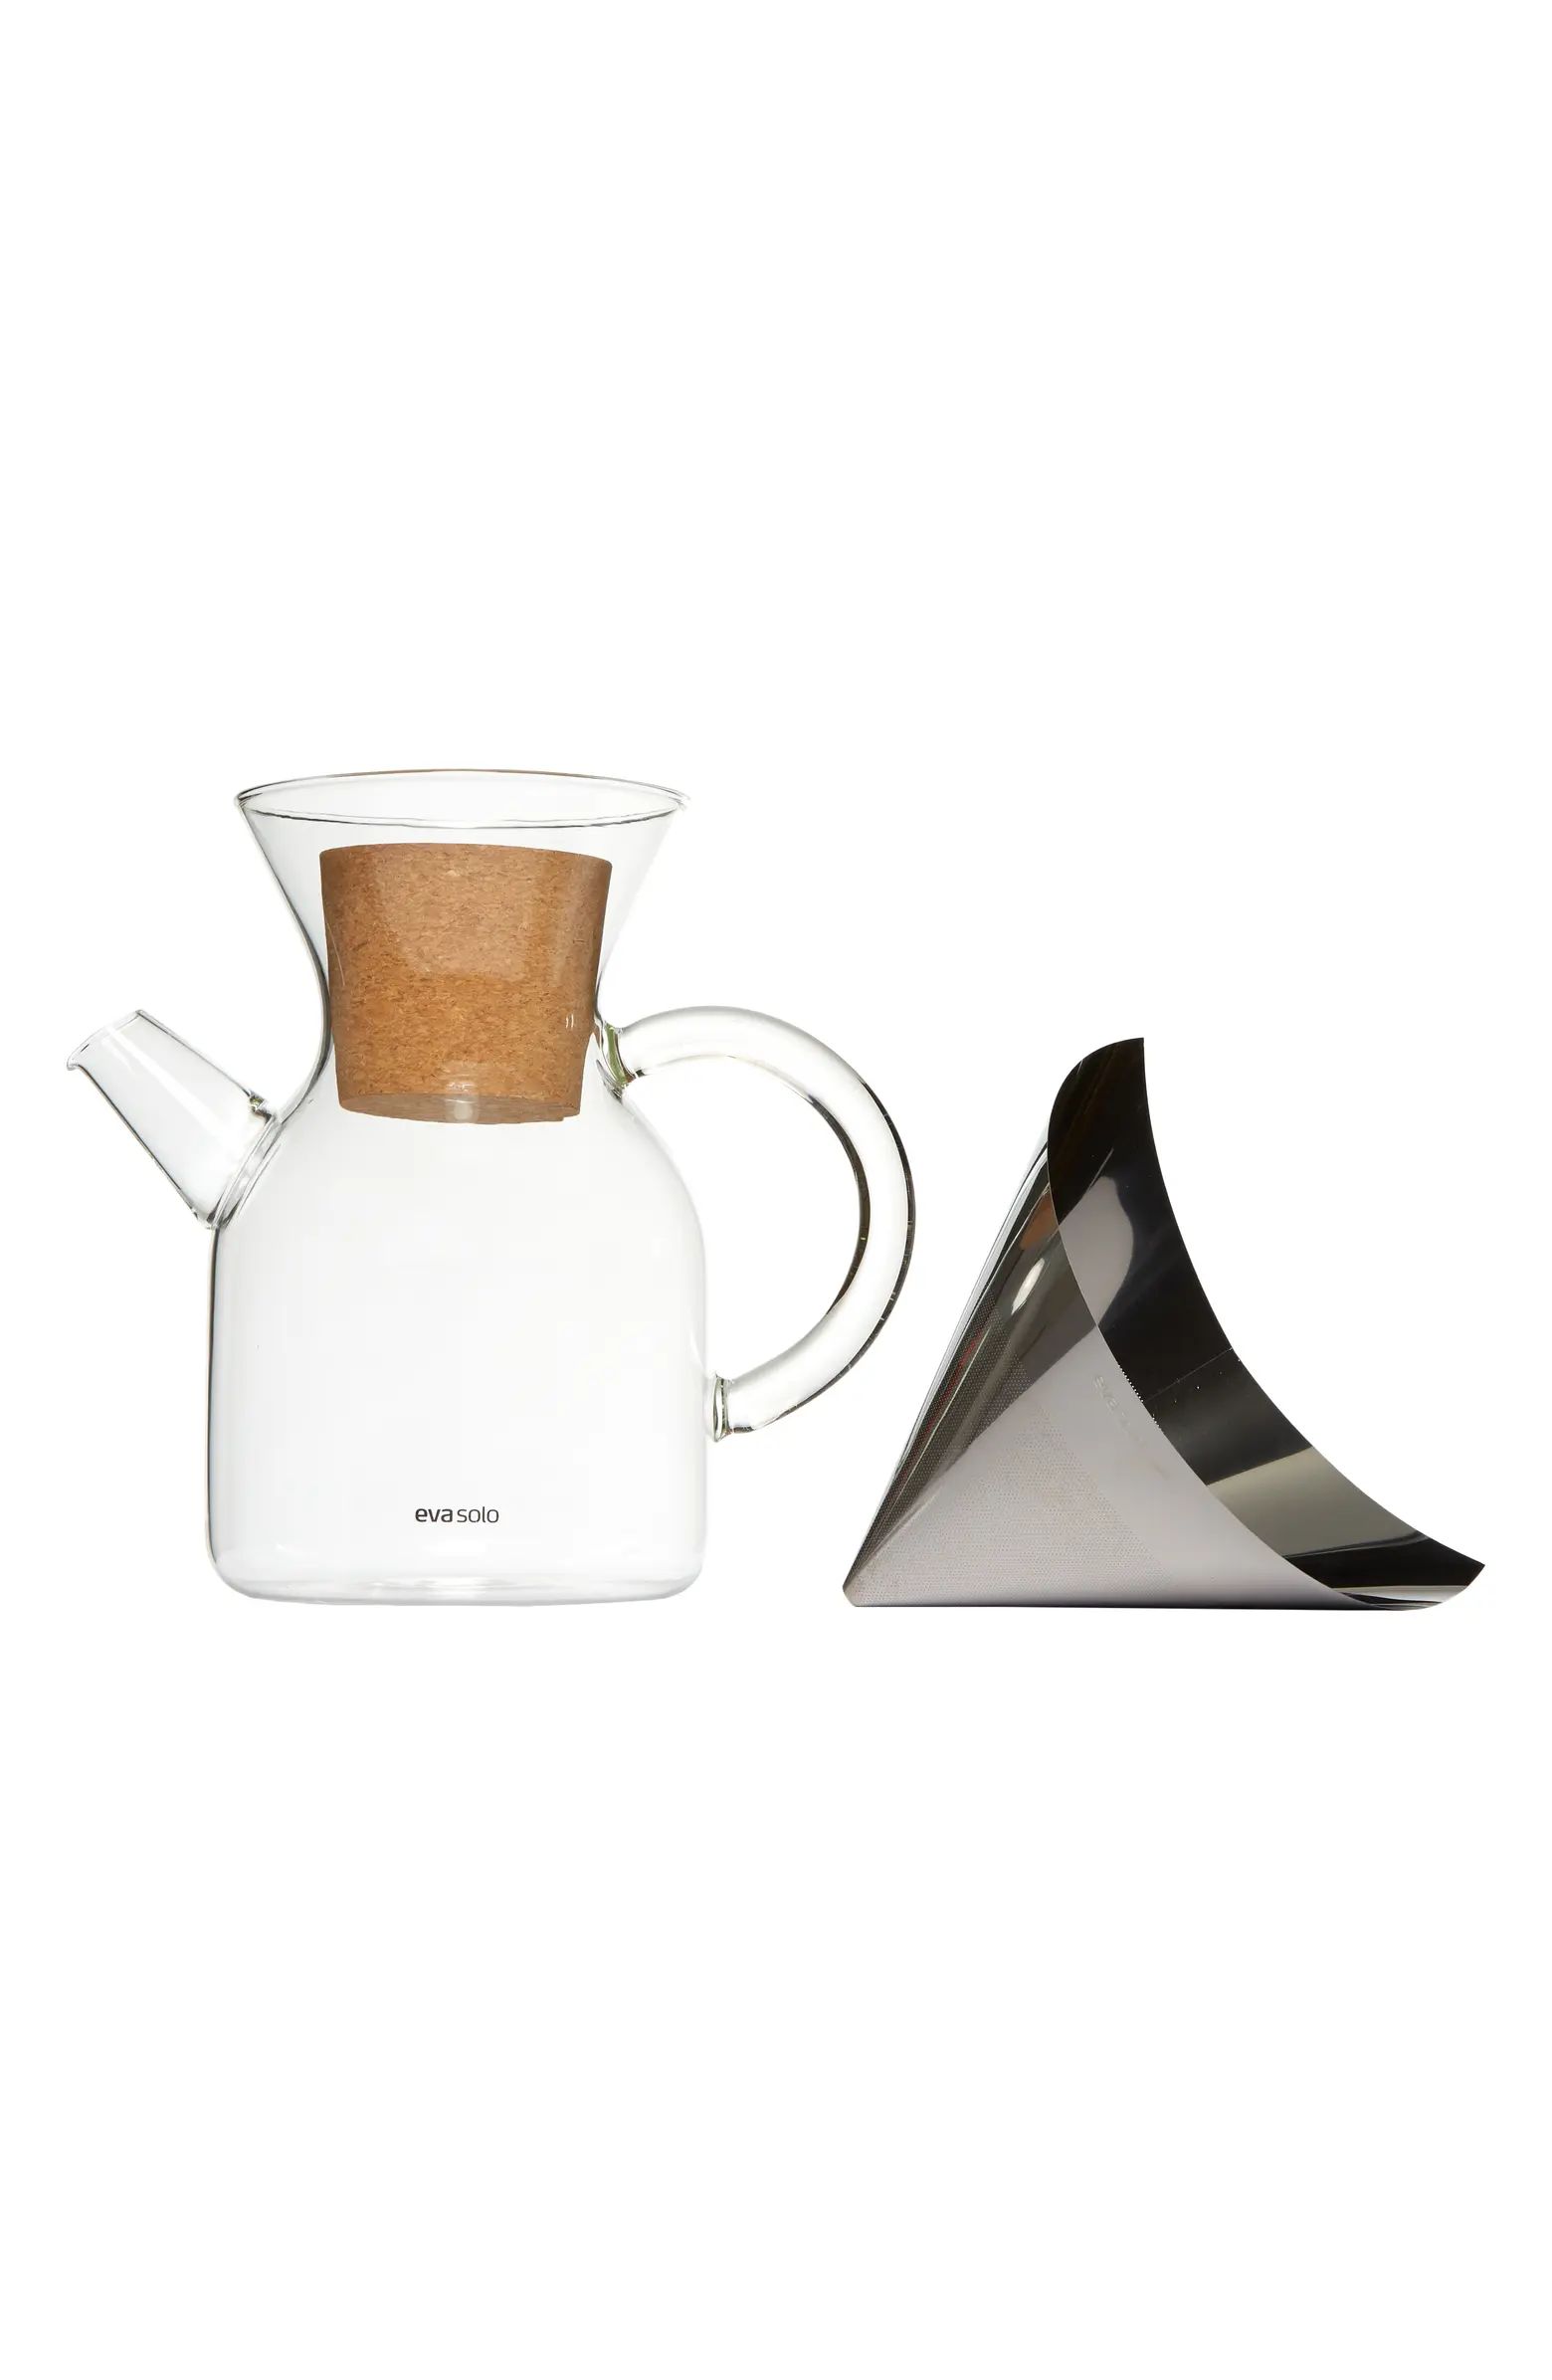 Design Store Pour Over Coffee Carafe | Nordstrom